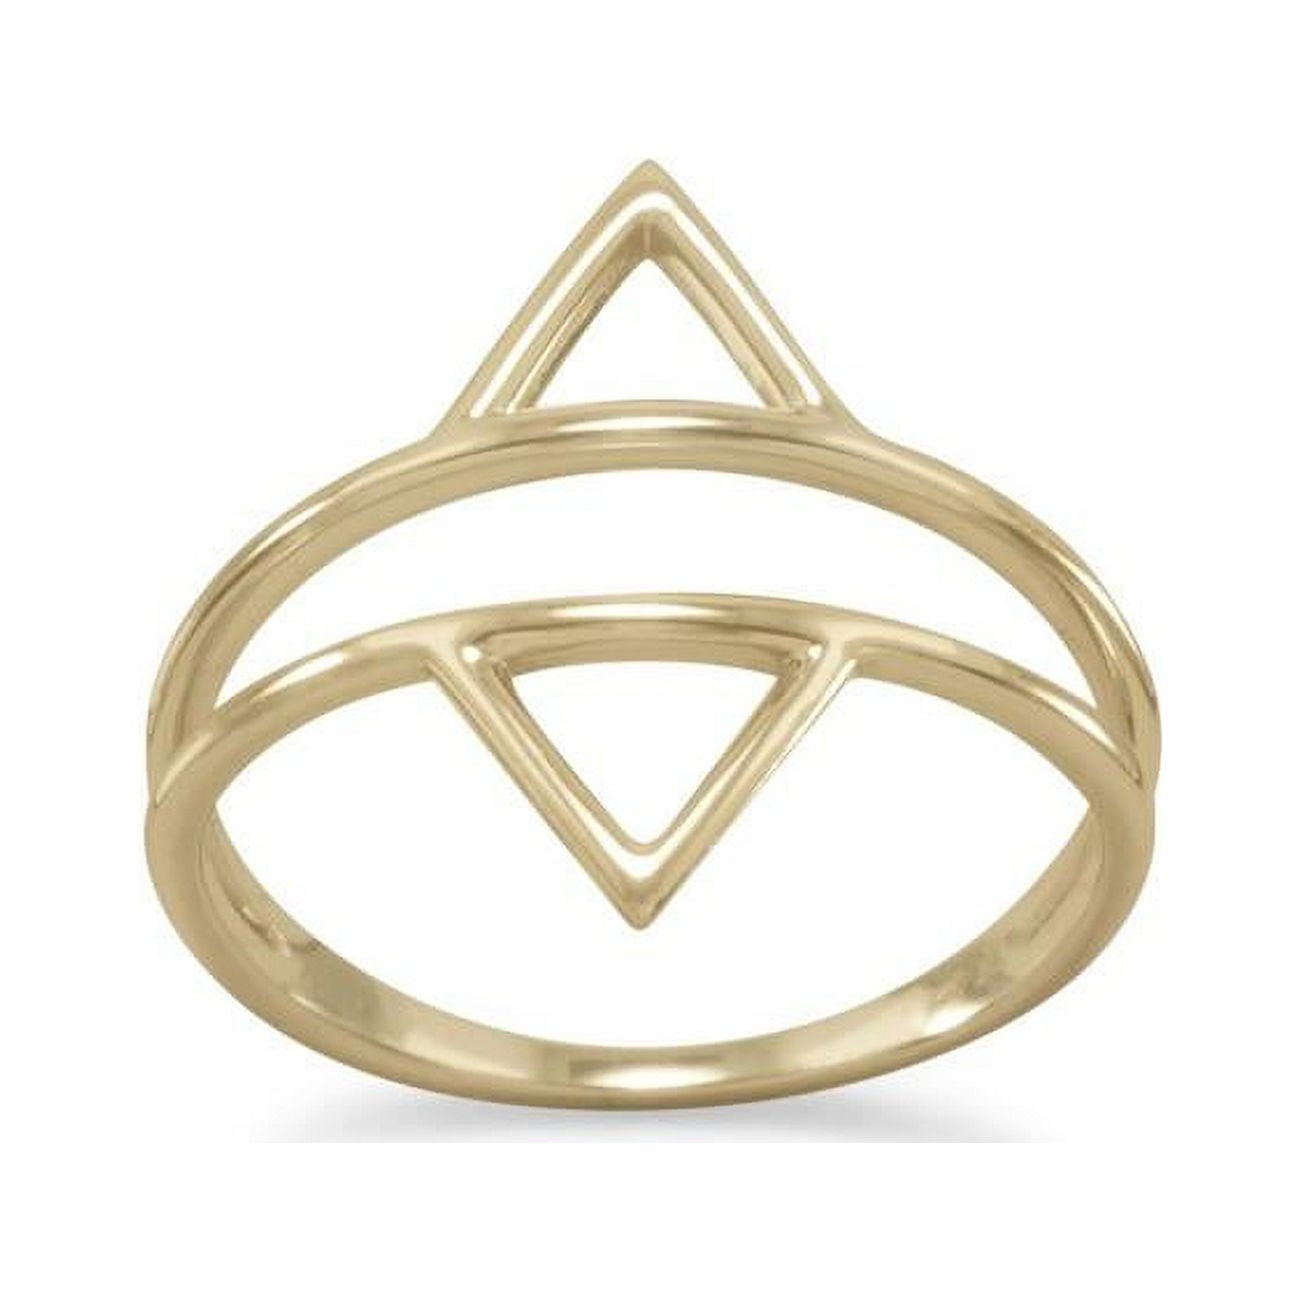 83697-8 14k Gold Plated Double Triangle Ring - Size 8